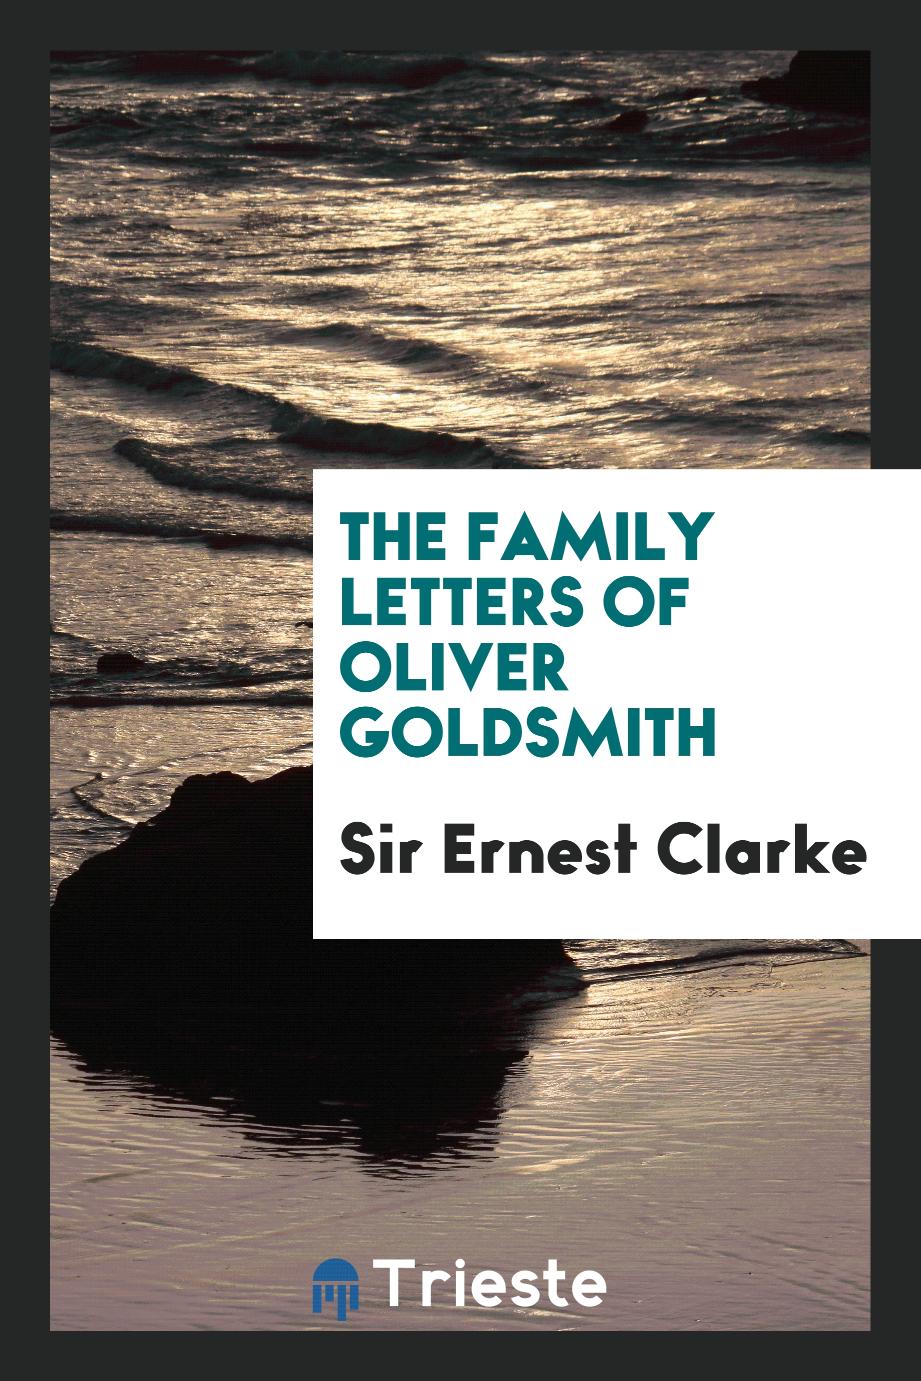 The family letters of Oliver Goldsmith